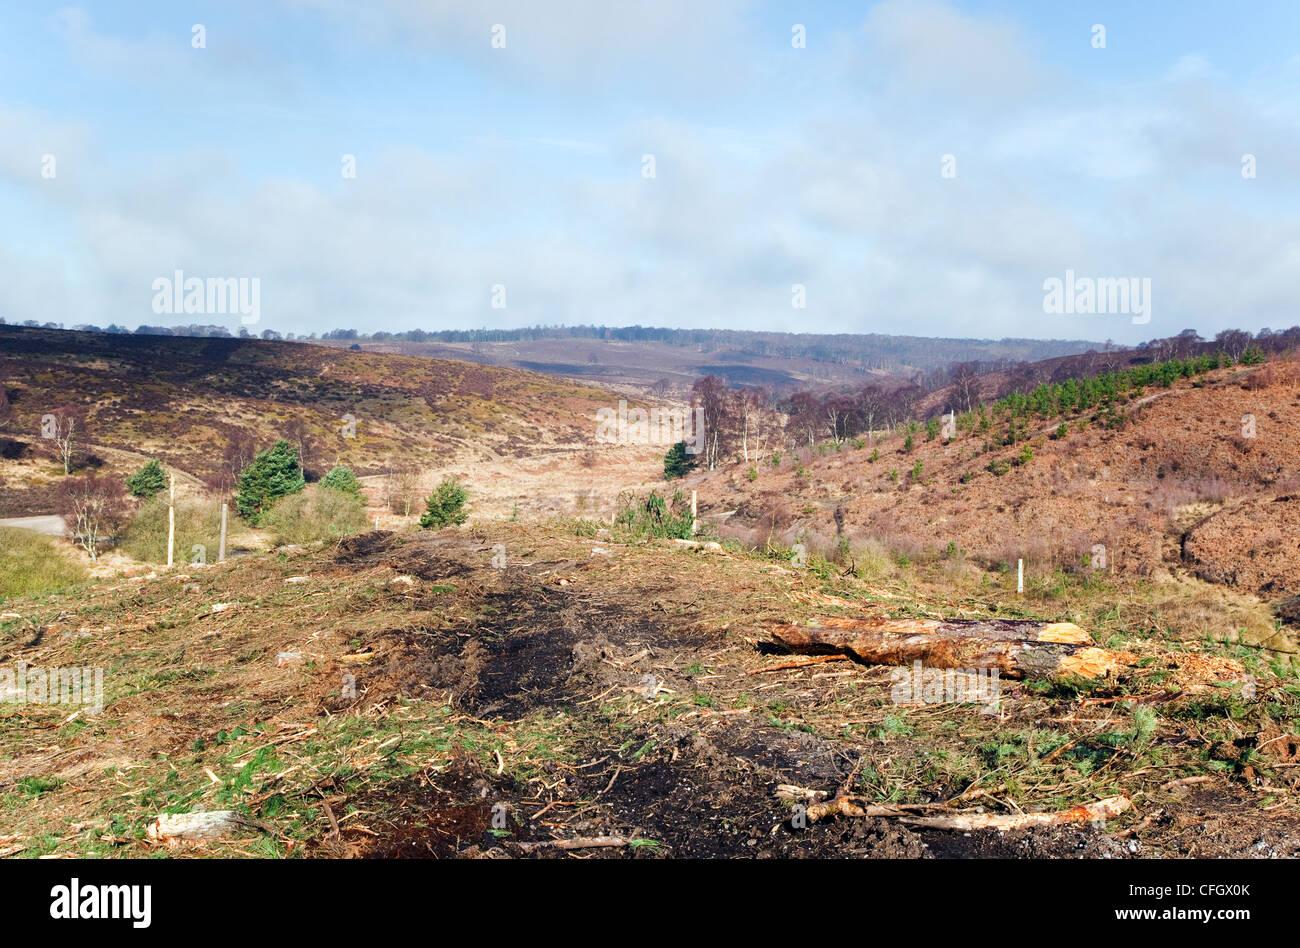 Deforestation Cannock Chase Country Park AONB (area of outstanding natural beauty) in Staffordshire England UK Stock Photo